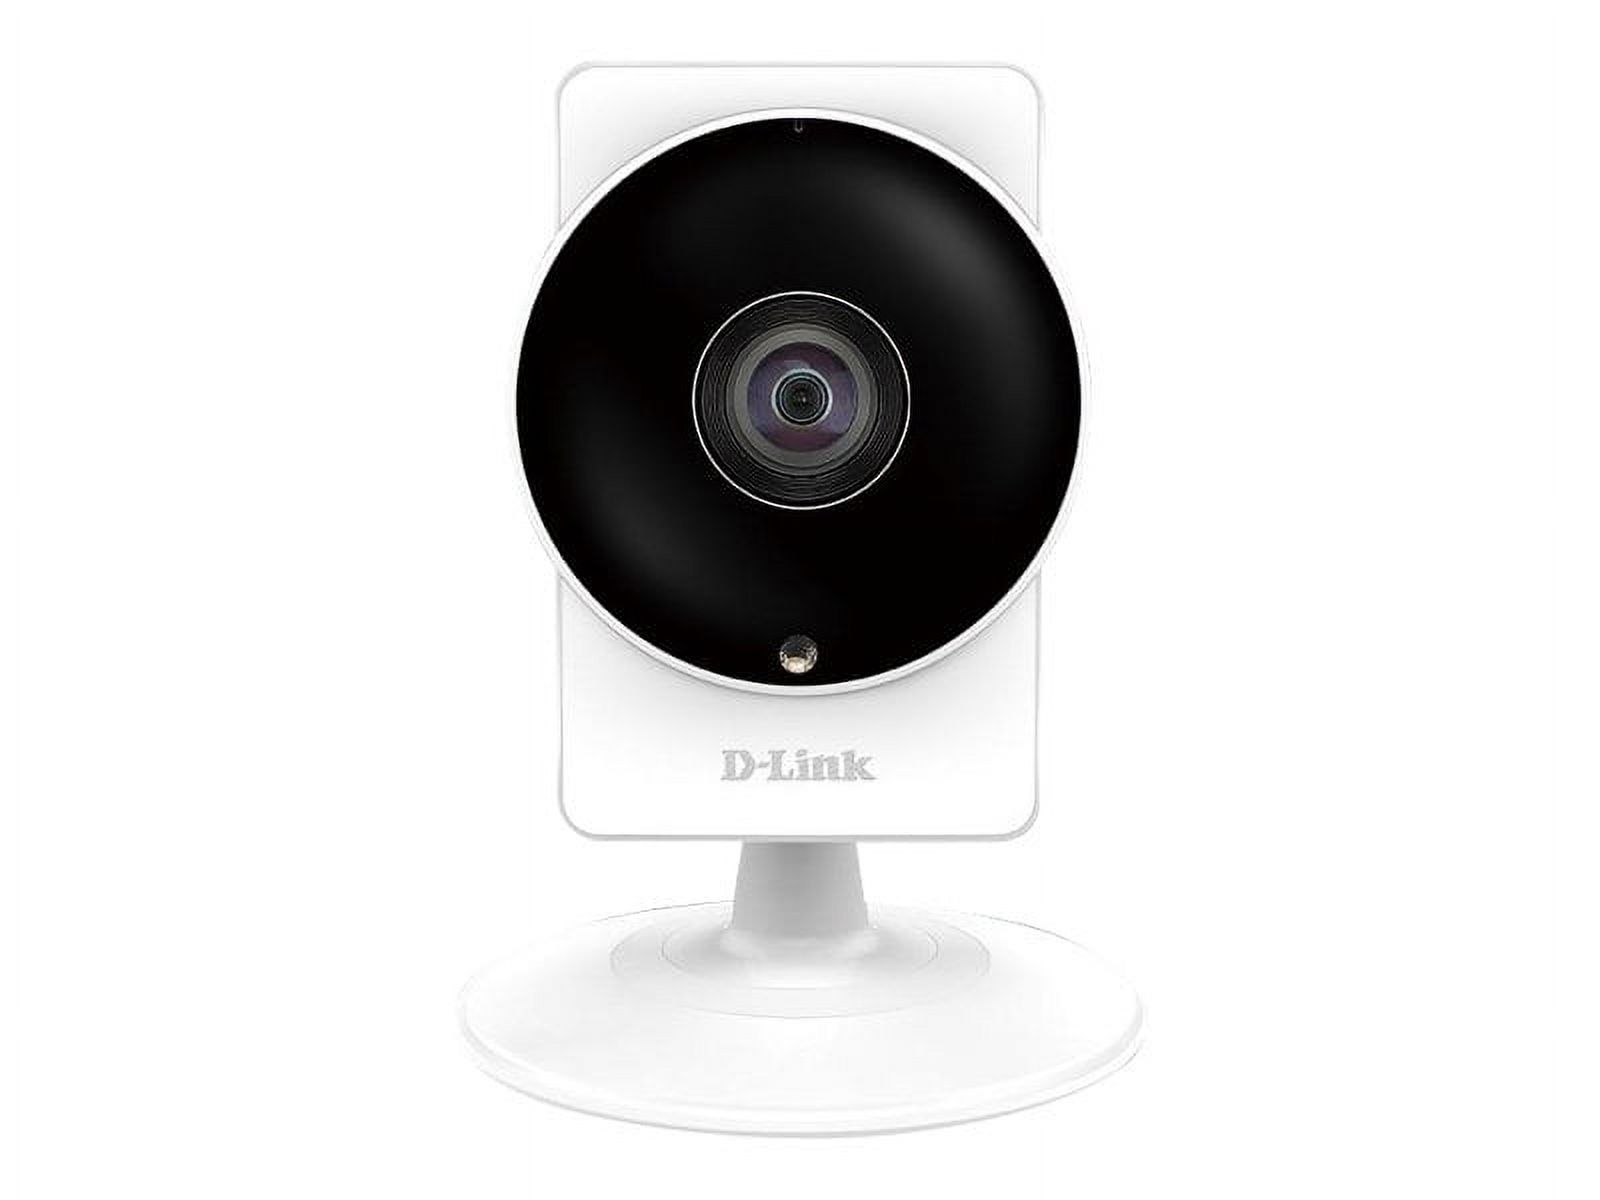 mydlink Home Panoramic HD Camera - Network surveillance camera - color (Day&Night) - 1280 x 720 - fixed focal - audio - Wi-Fi - MJPEG, H.264 - DC 5 V - image 3 of 7